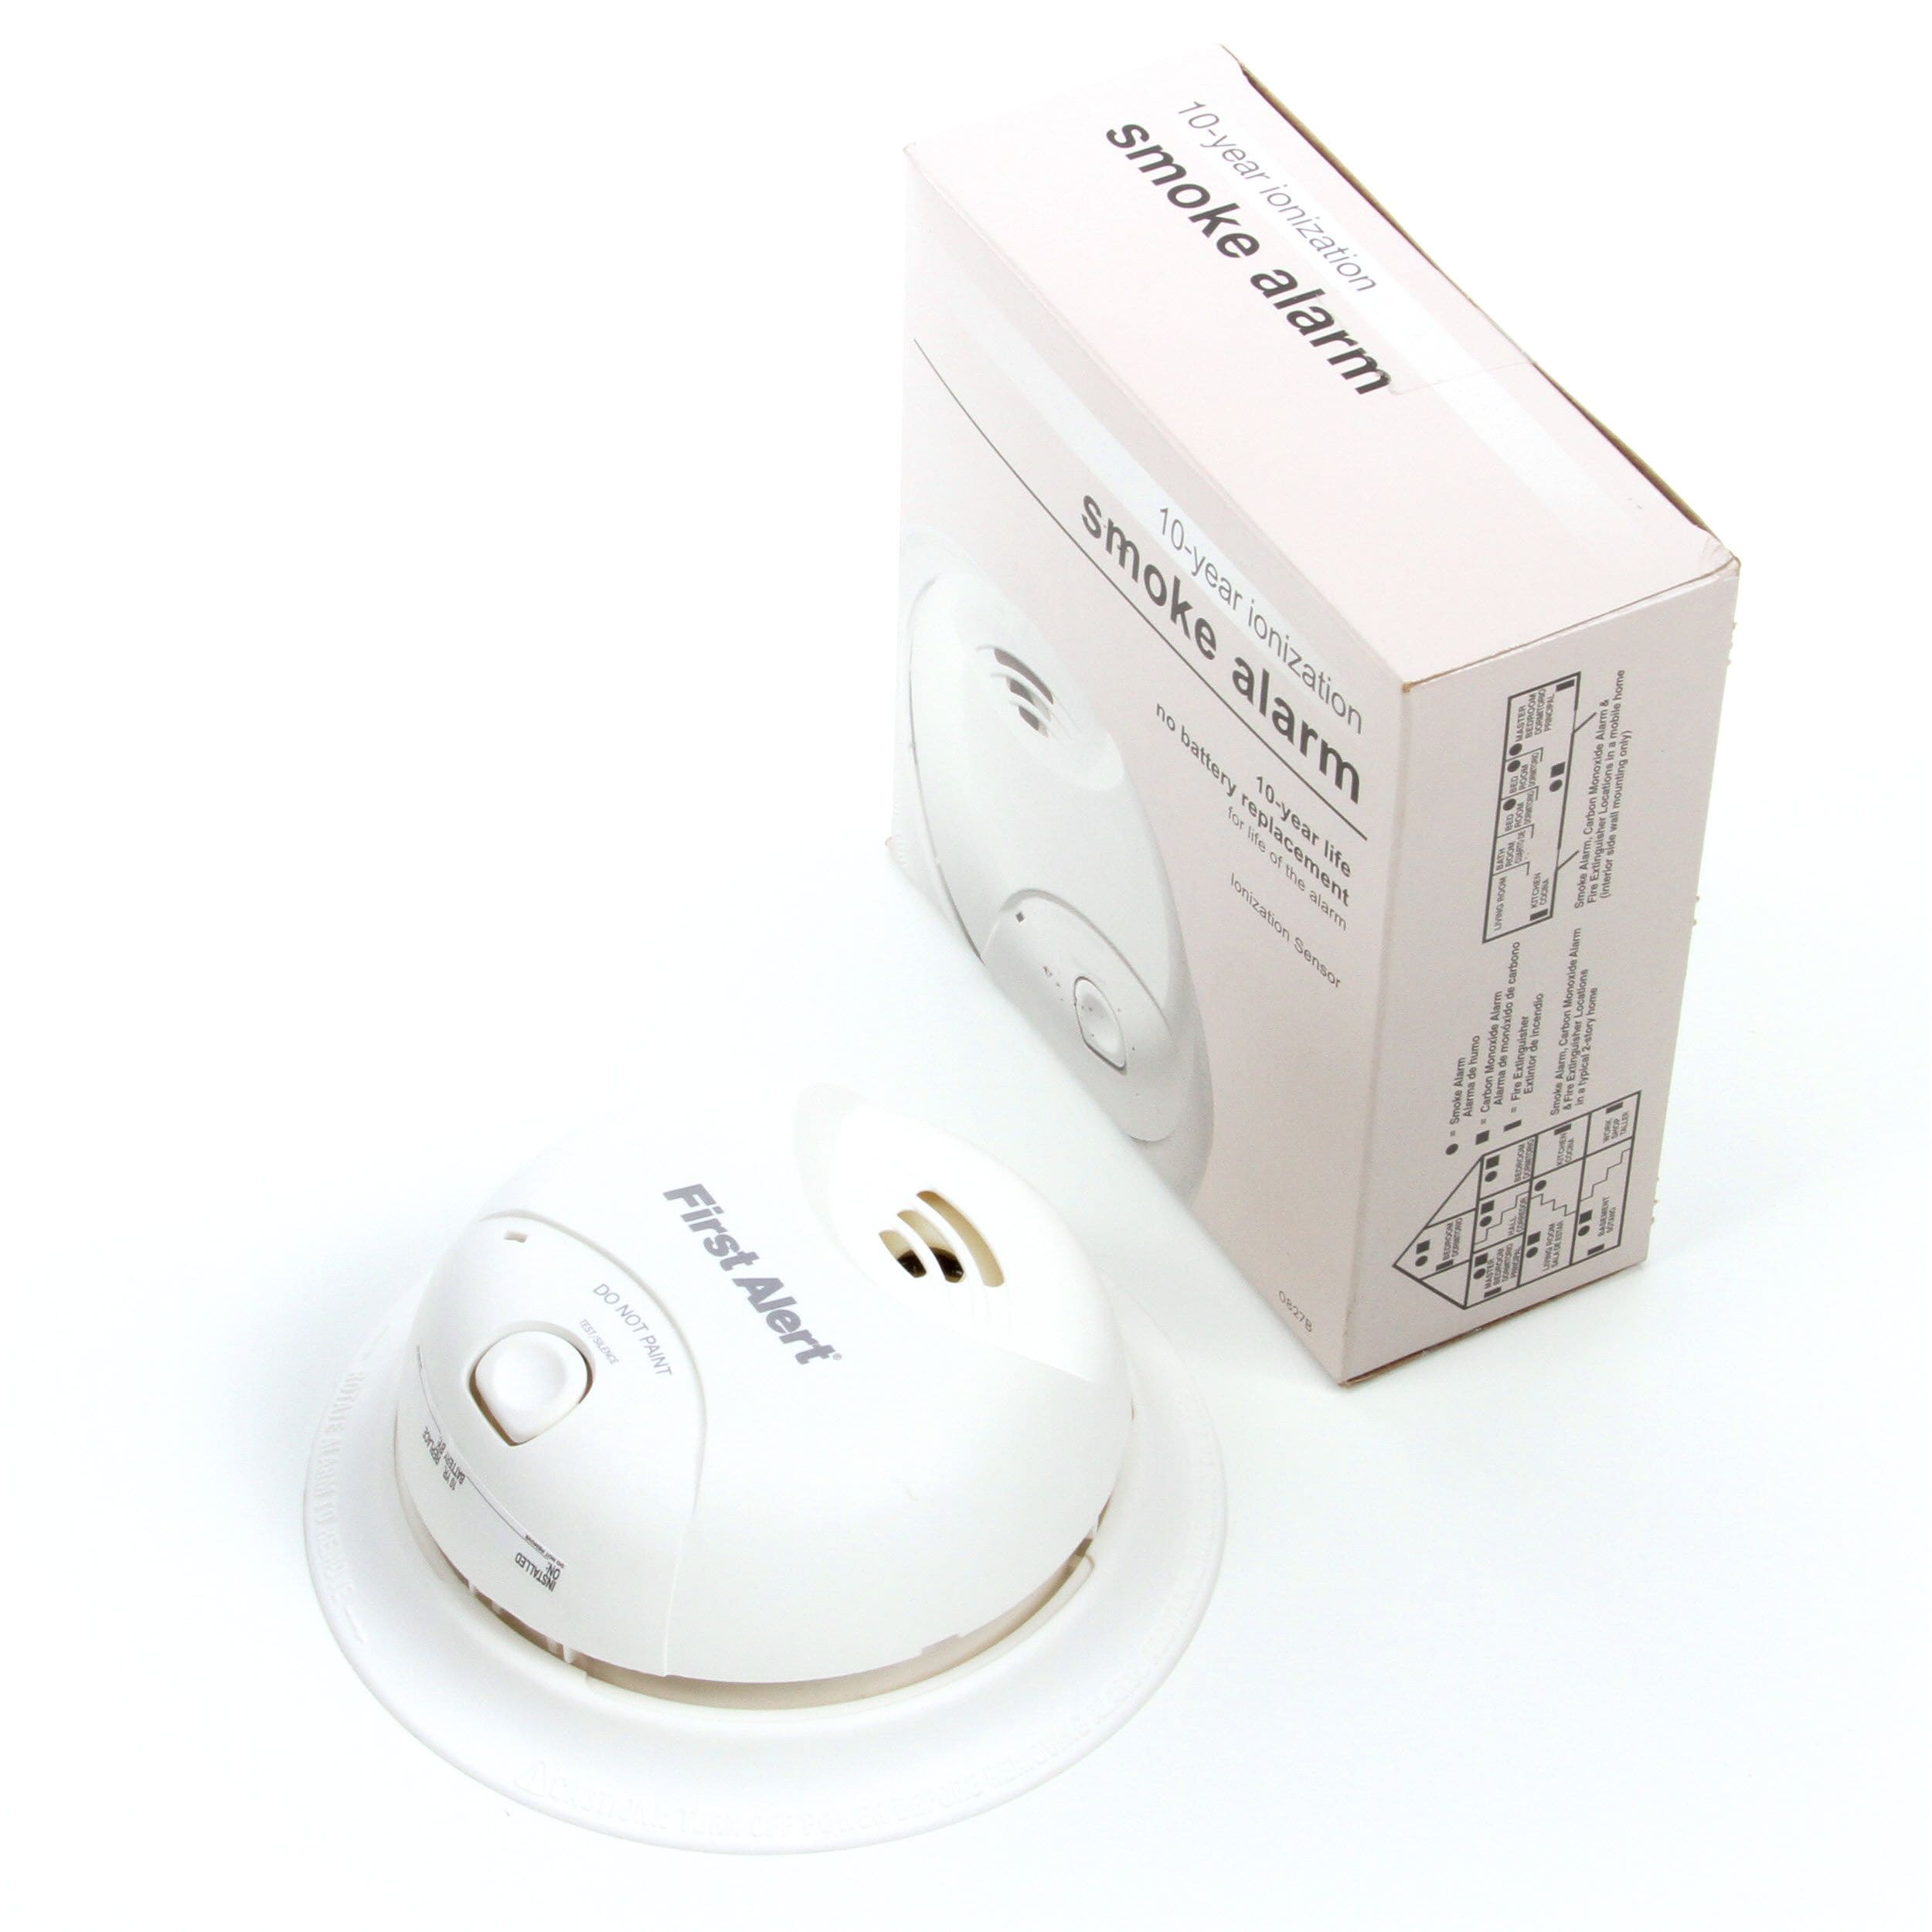 Details about   10 Years Smoke Alarm Detector Battery Powered Home Fire Safety Warning Alert 